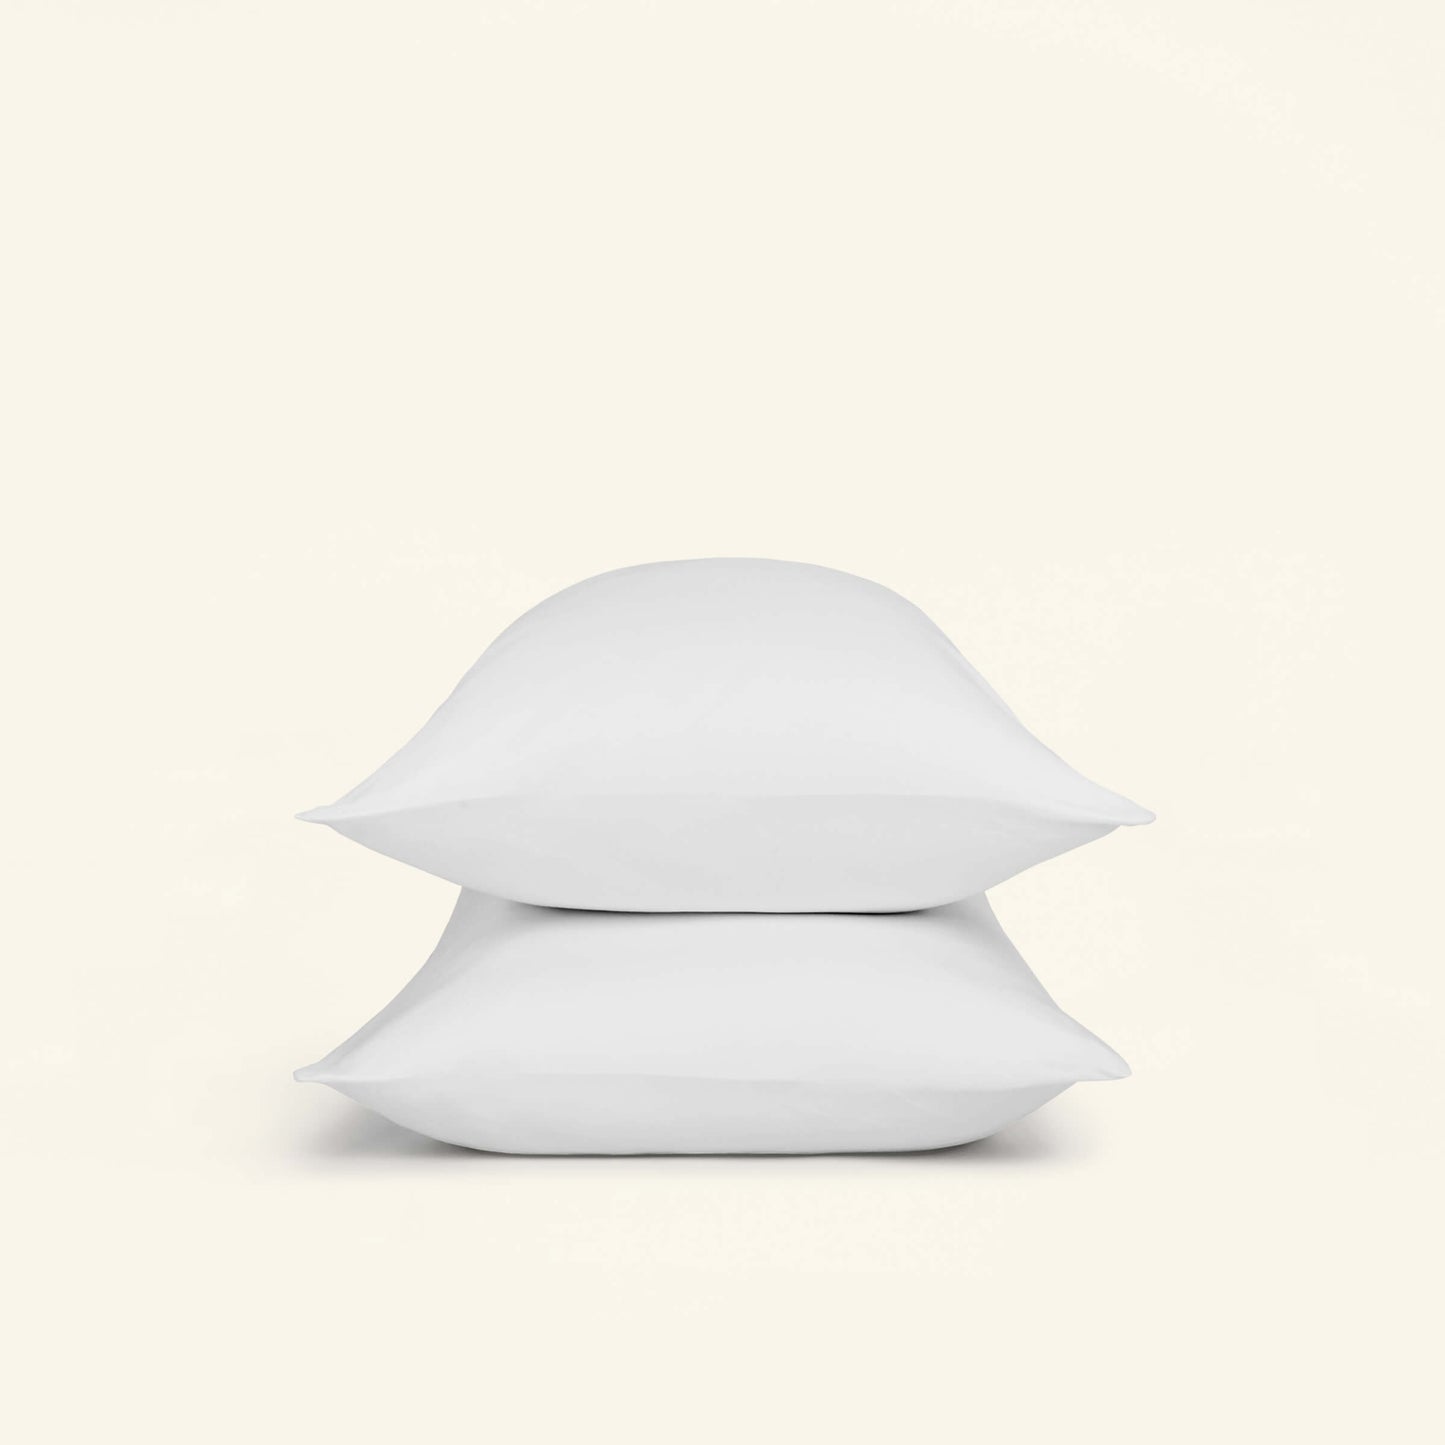 The Slumber Cloud Performance Pillowcases made with Outlast temperature regulation technology and Tencel to help you stay cool through the night.